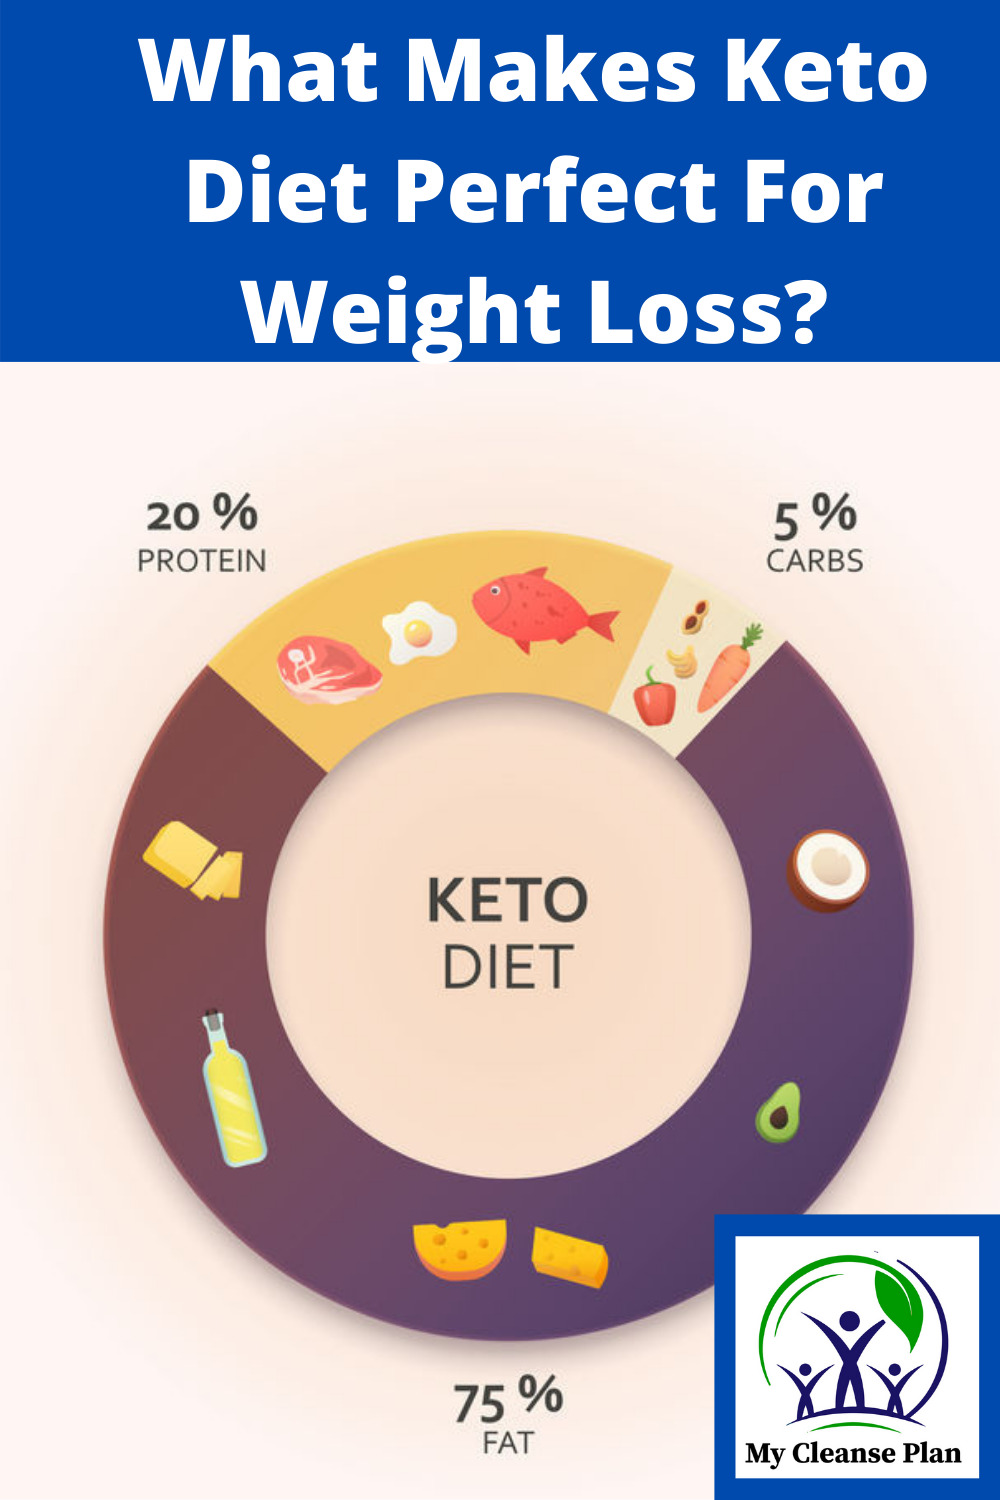 What Makes Keto Diet Perfect For Weight Loss